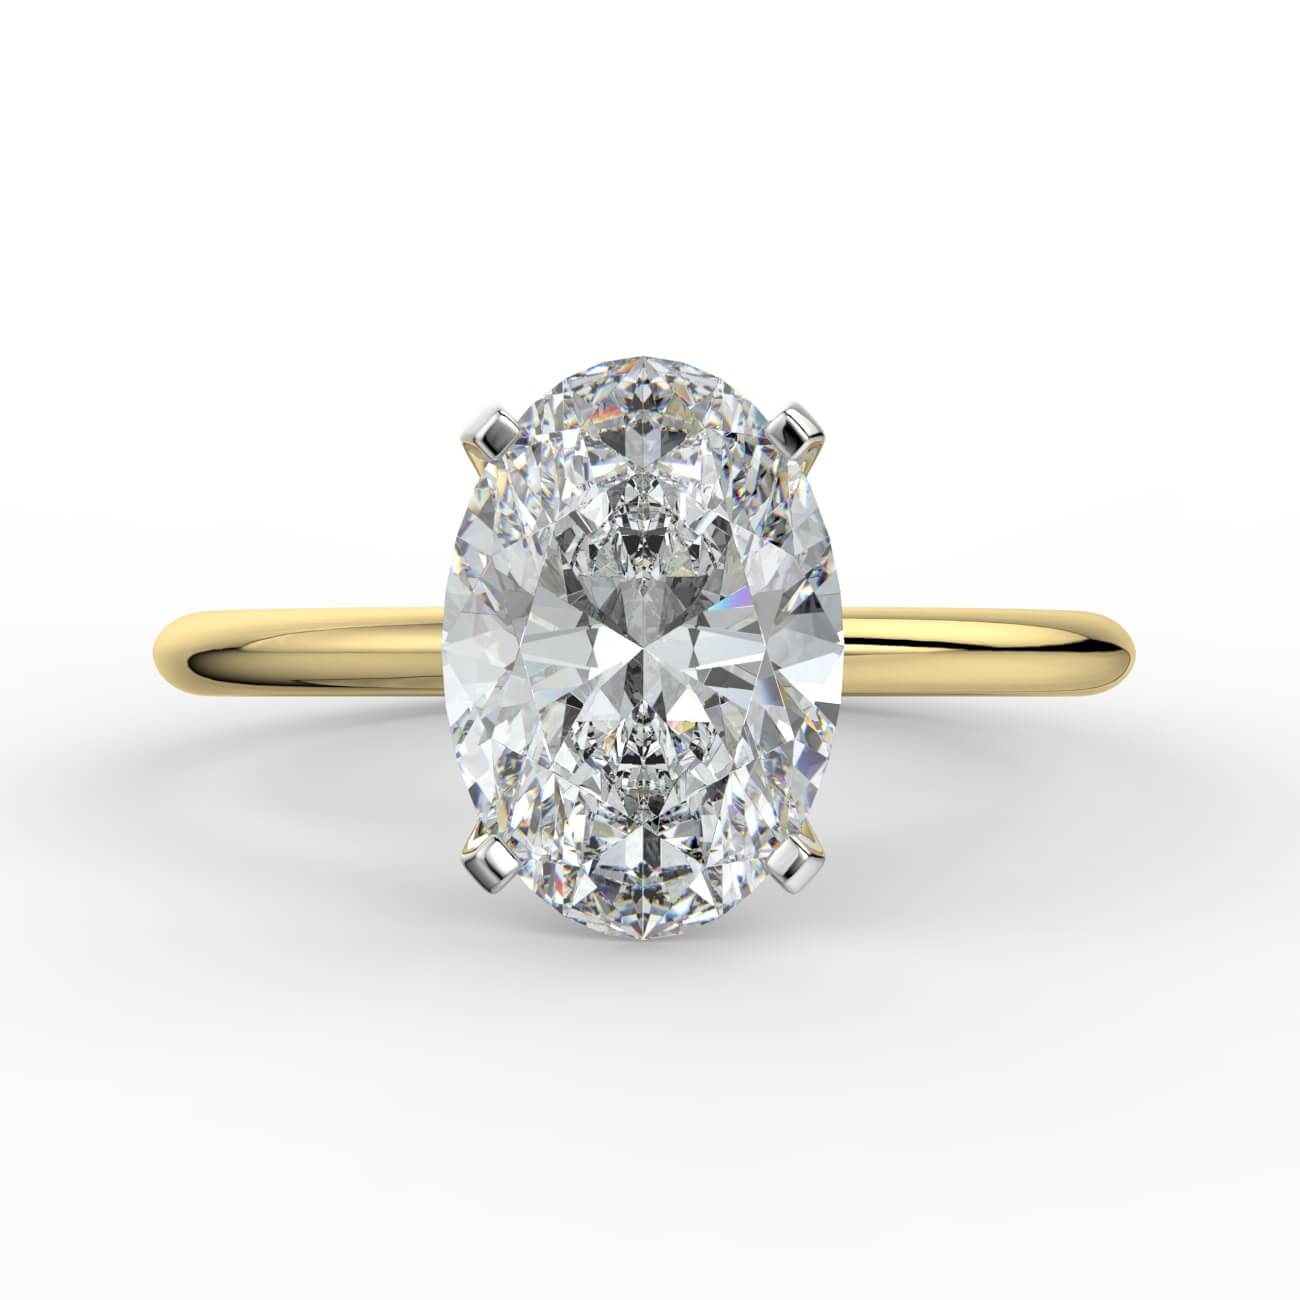 Knife-edge solitaire oval diamond engagement ring in white and yellow gold – Australian Diamond Network